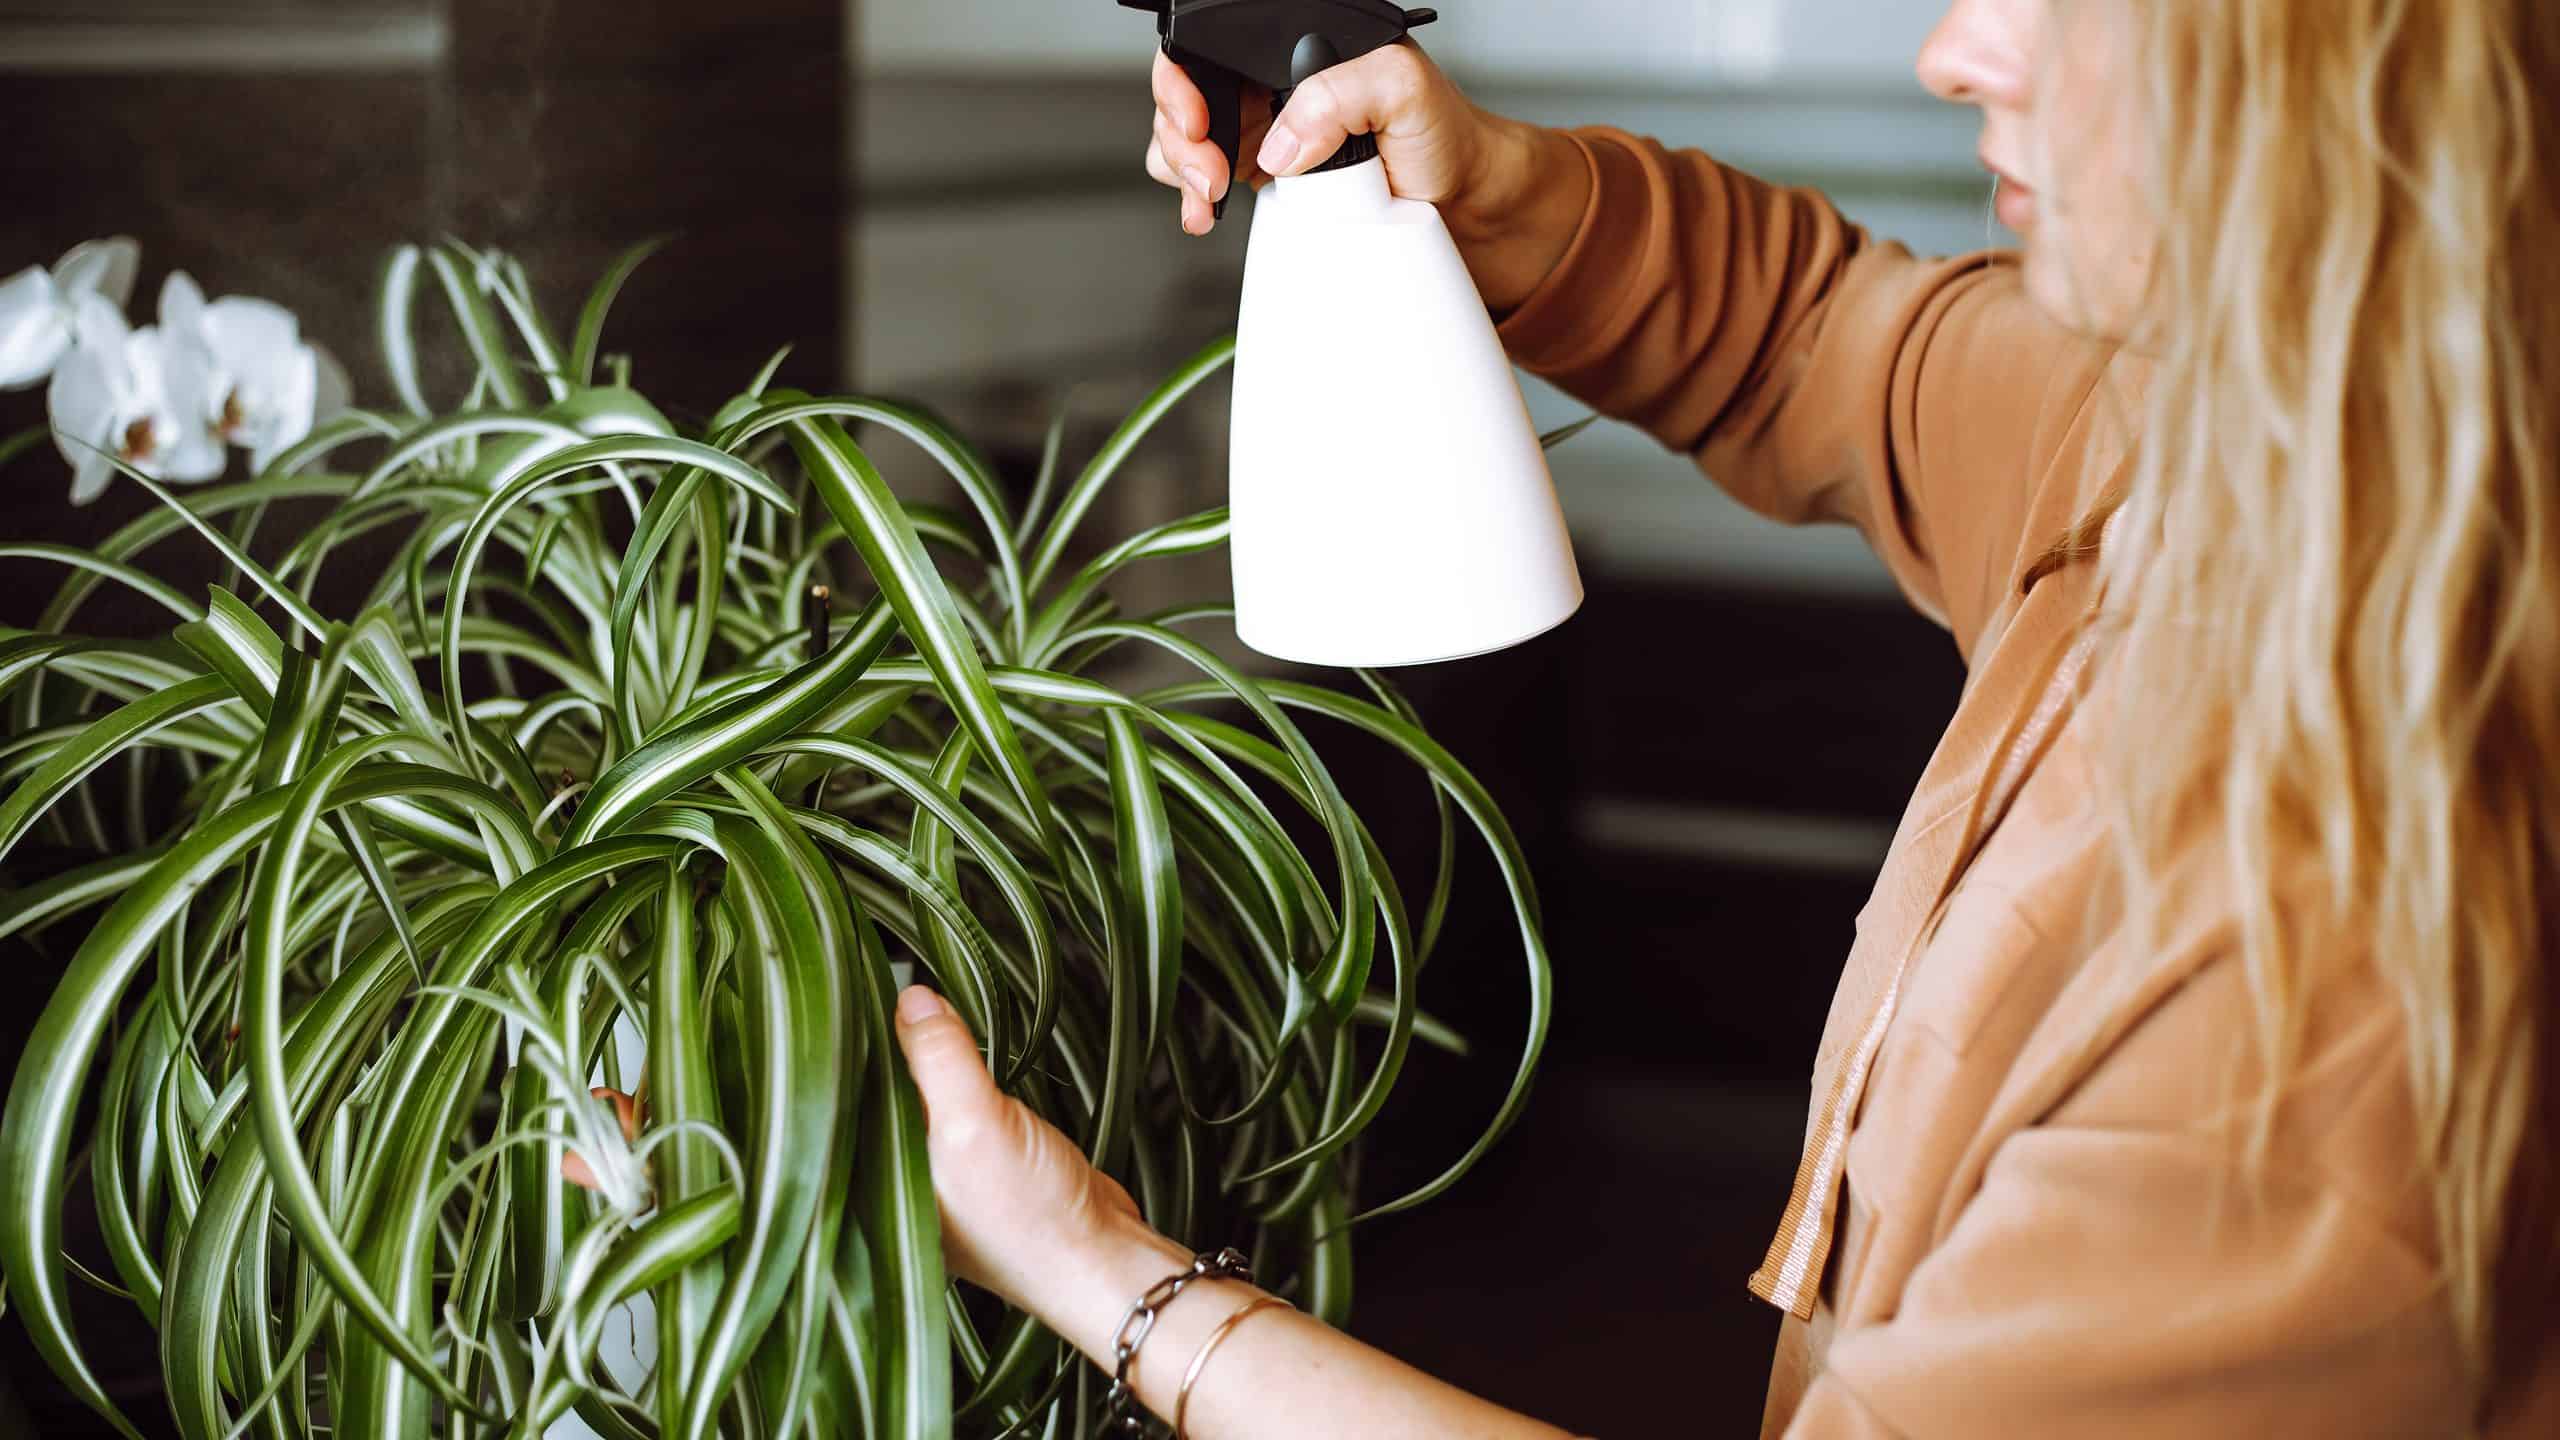 A woman misting a spider plant with a bottle of water